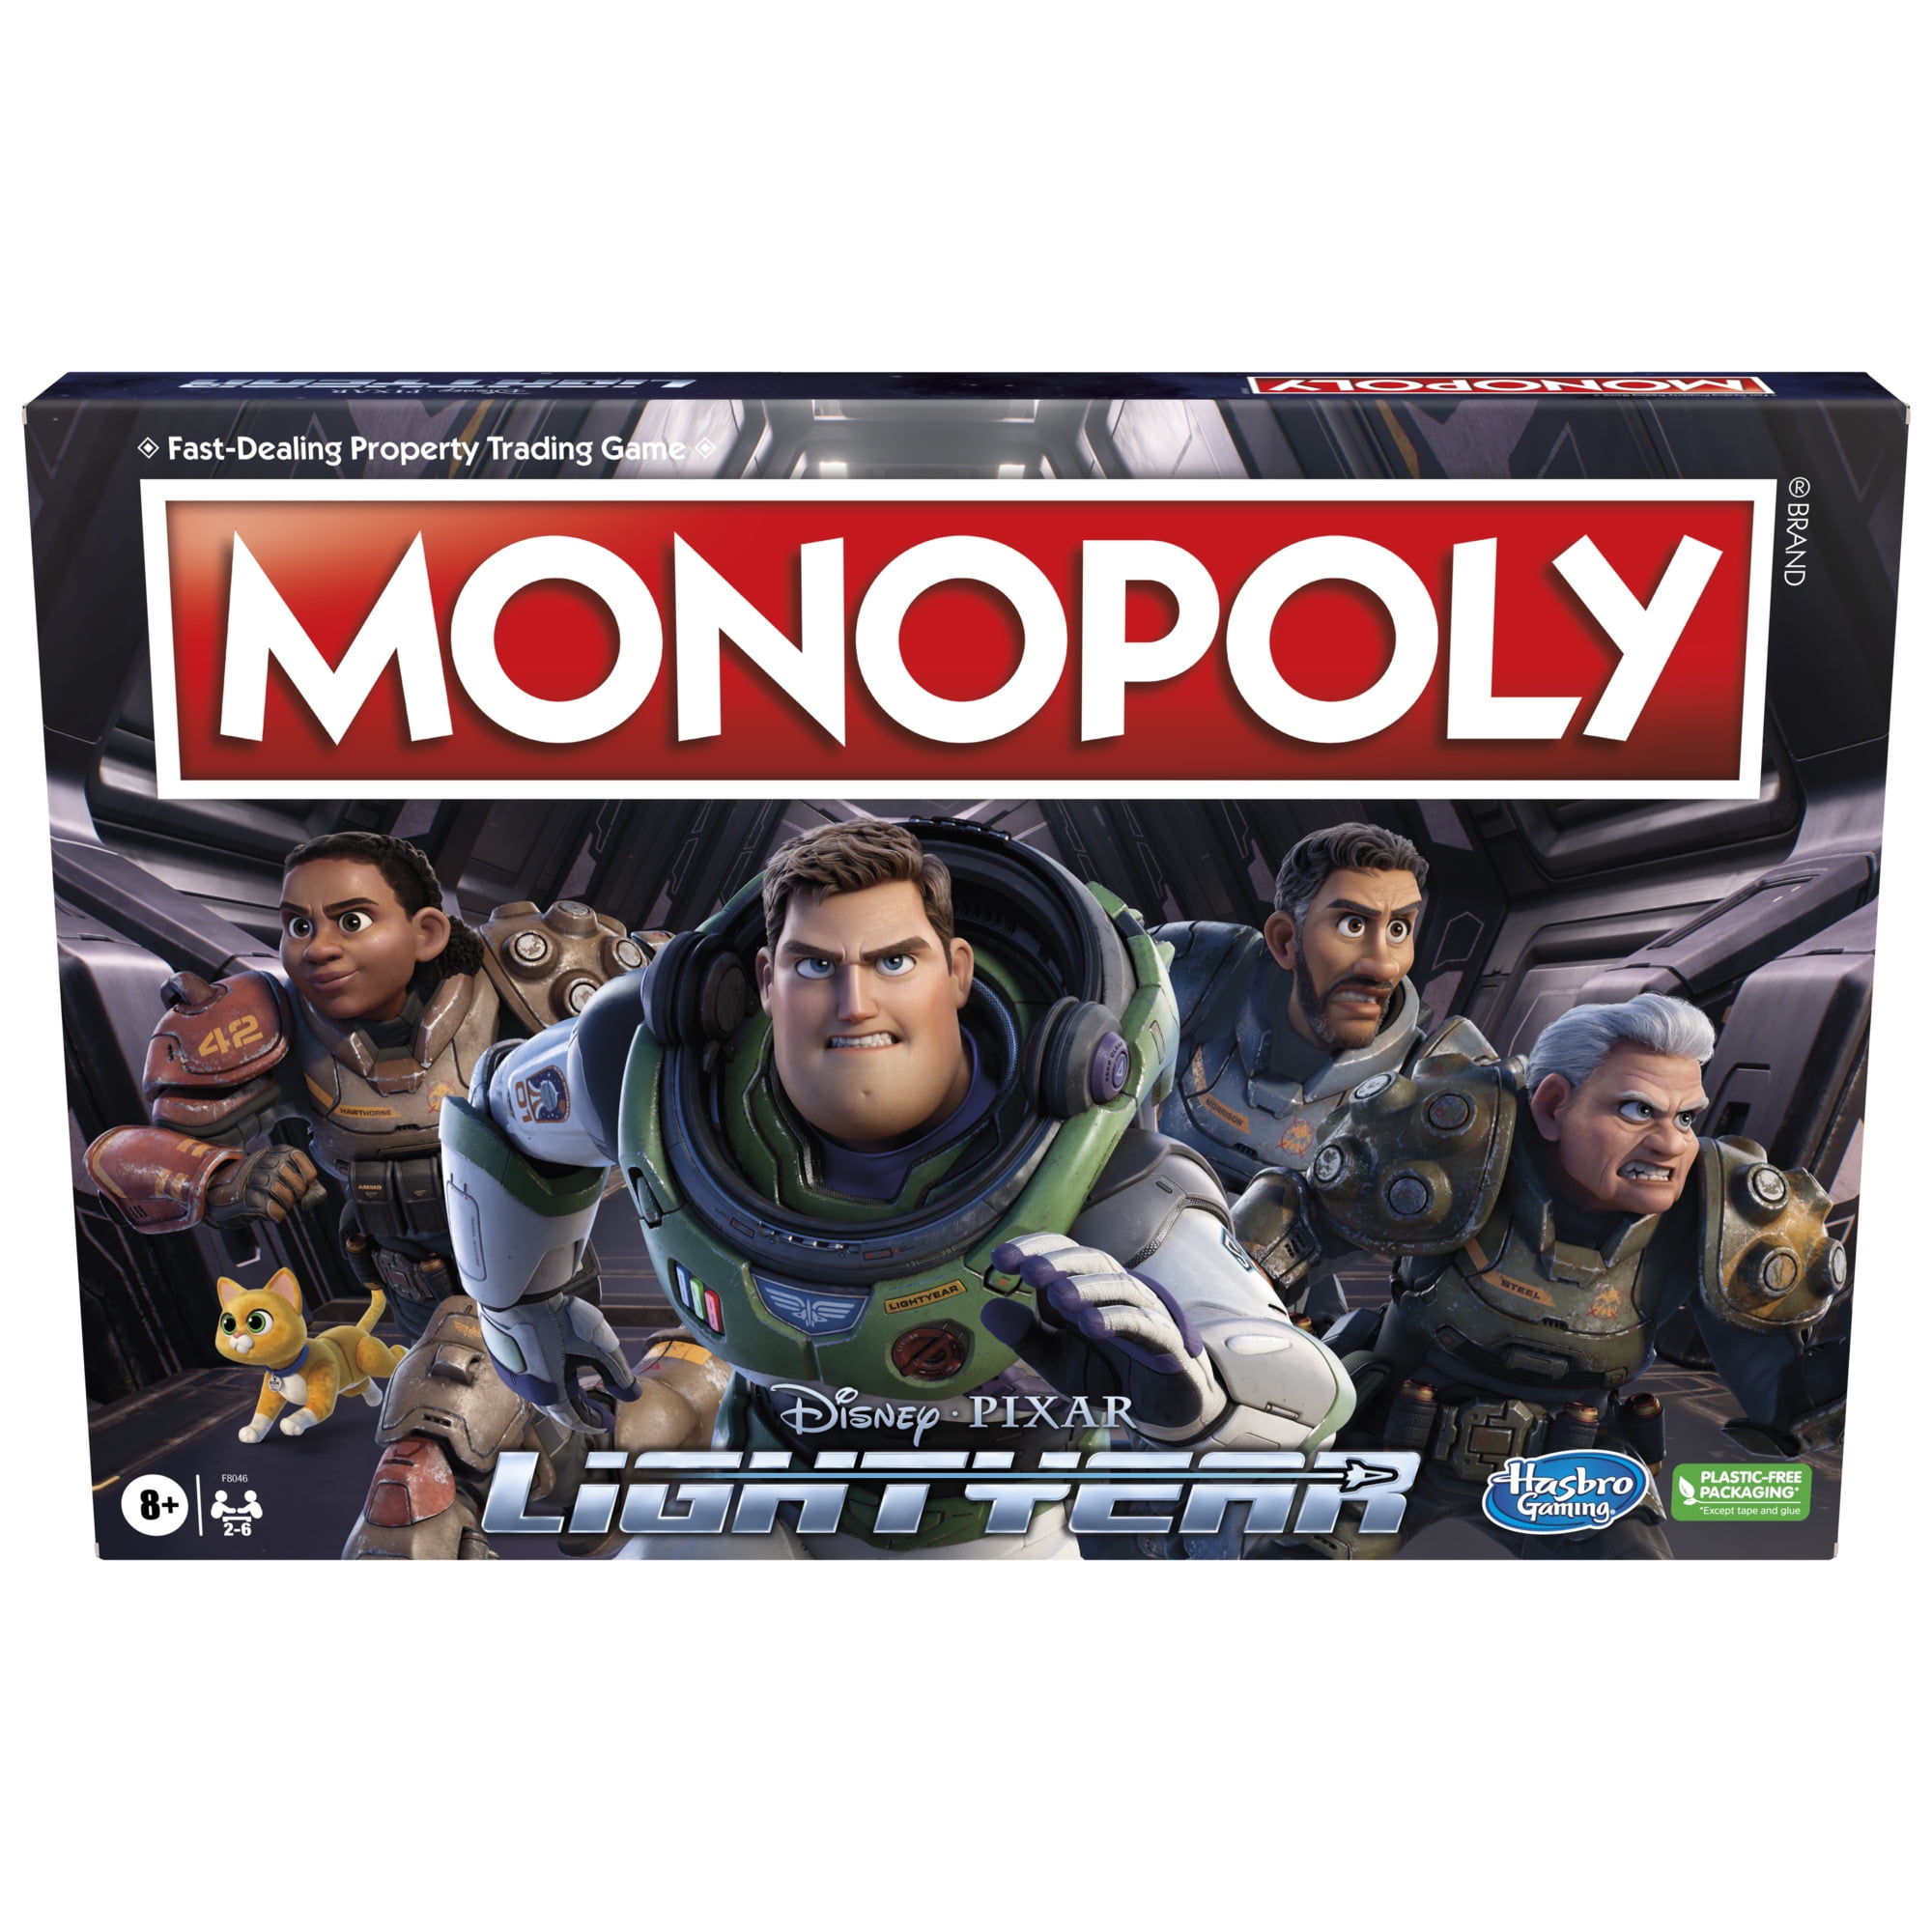 Monopoly: Disney and Pixar's Lightyear Edition Board Game $6.27 + Free S&H w/ Walmart+ or $35+